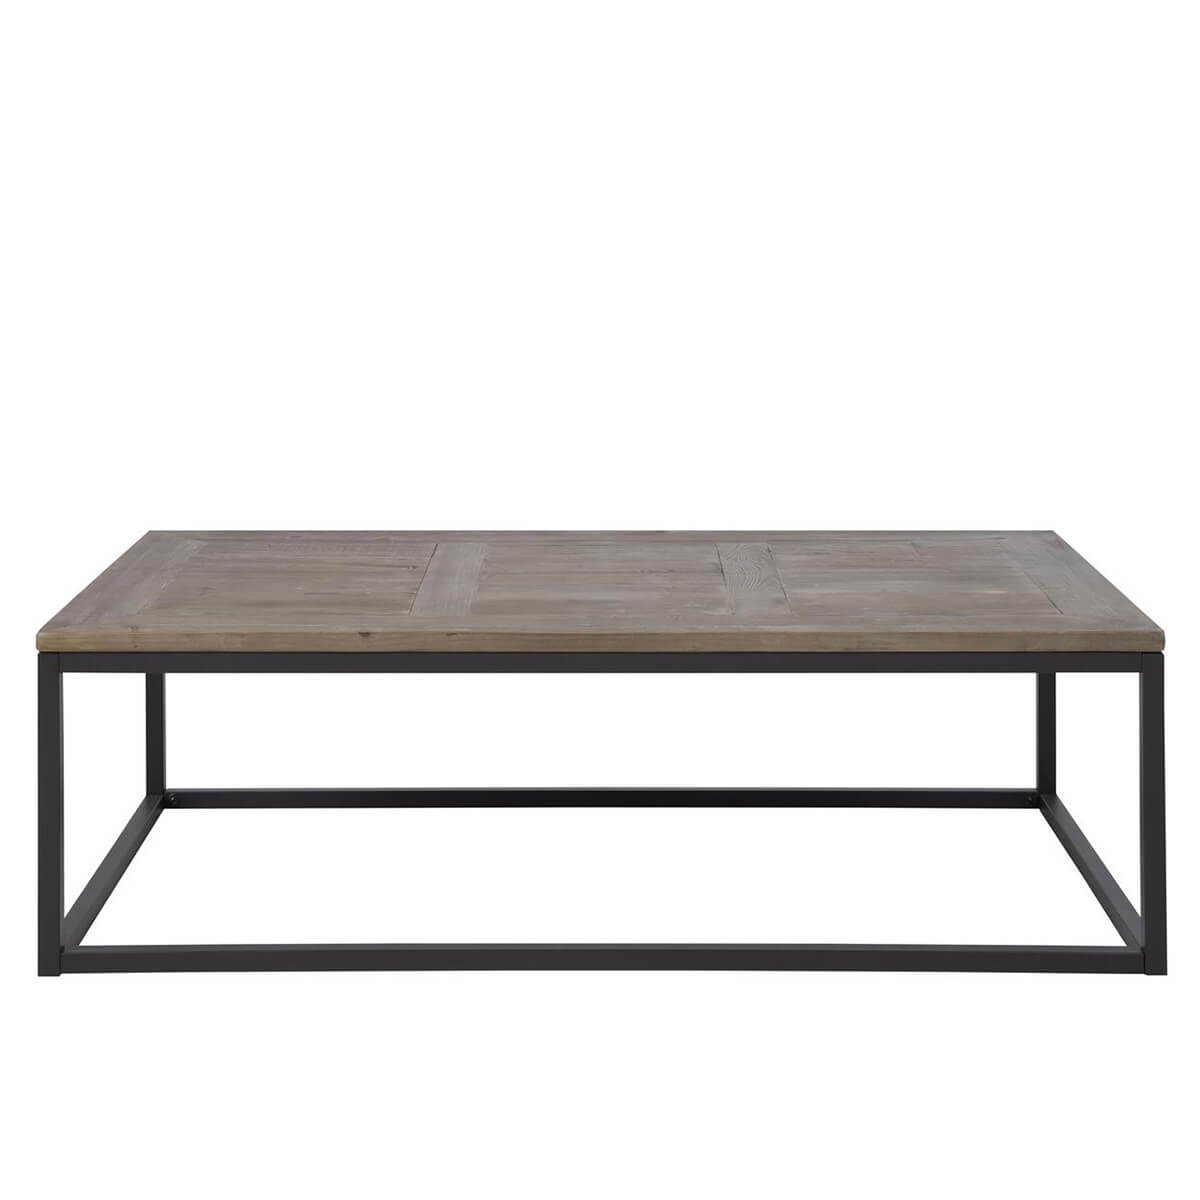 Rockwood Recycled Solid Wood Industrial Style Coffee Table Fads regarding measurements 1200 X 1200